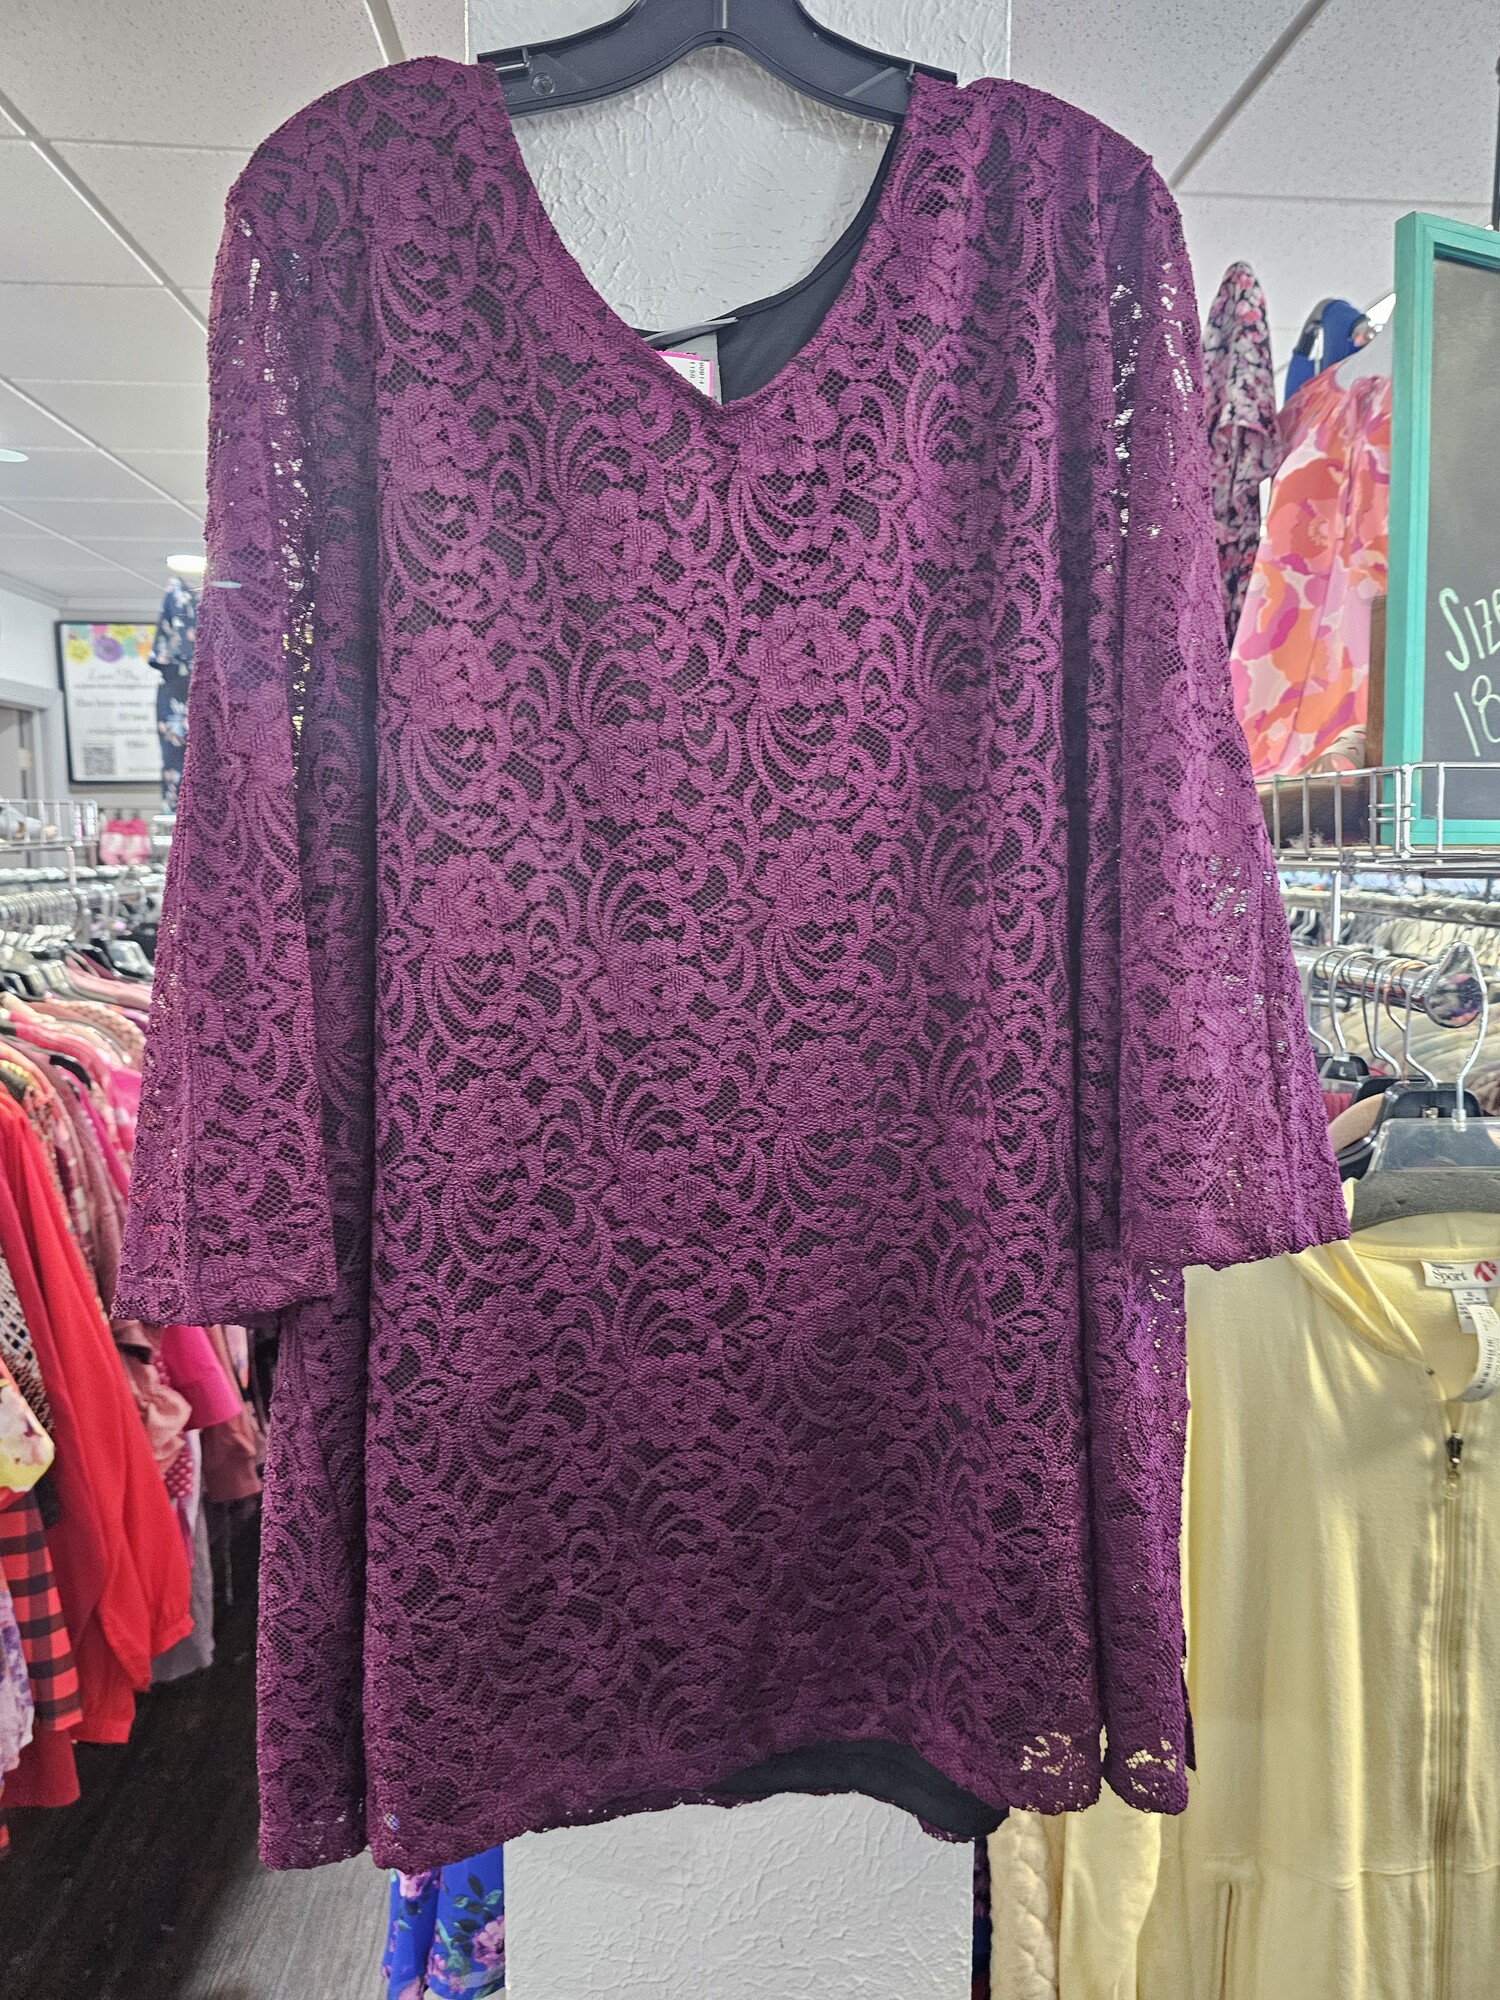 Brand new with tags and retails for $60. This burgandy wine colored blouse is allll the lace you could want with a black underlay for coverage.